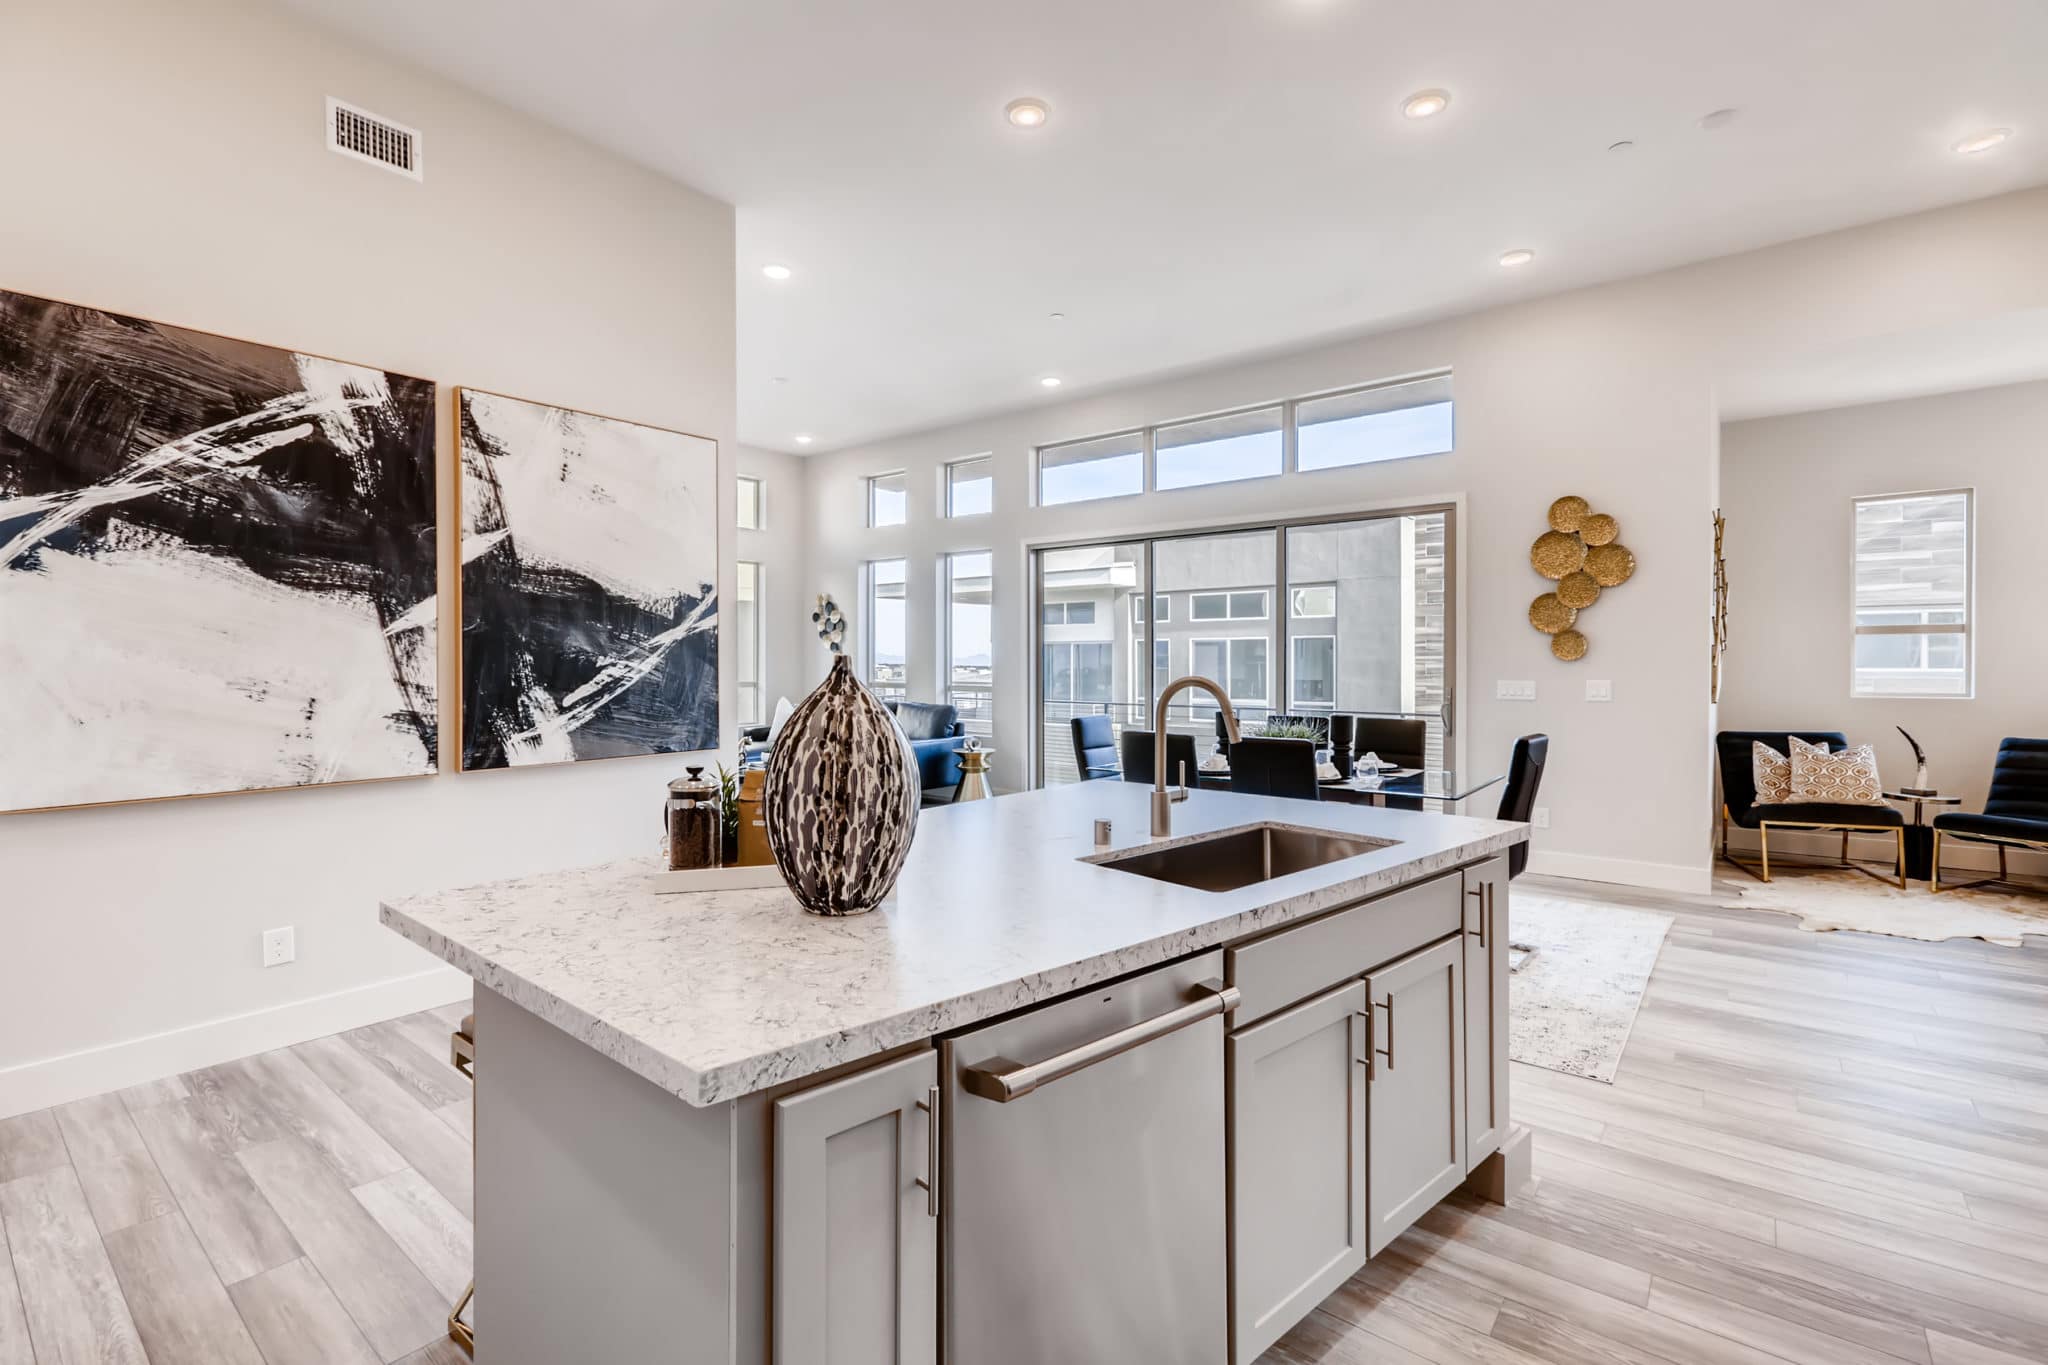 Kitchen in Summit in Modern Collection in Trilogy by Shea Homes in South Square in Summerlin